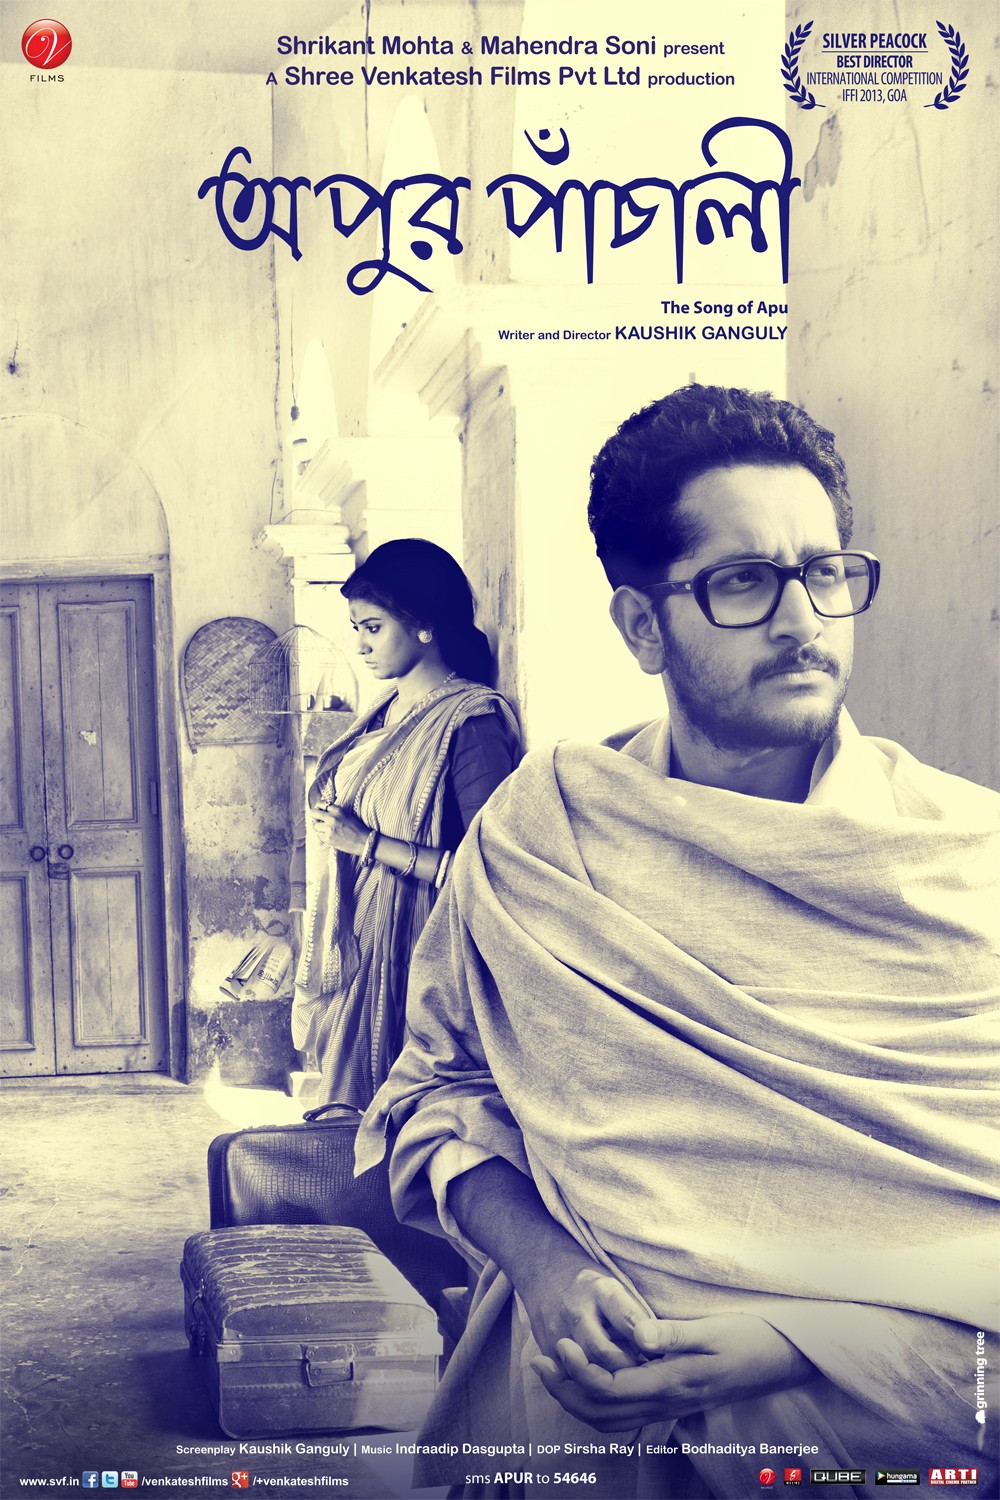 Extra Large Movie Poster Image for Apur Panchali (#5 of 5)